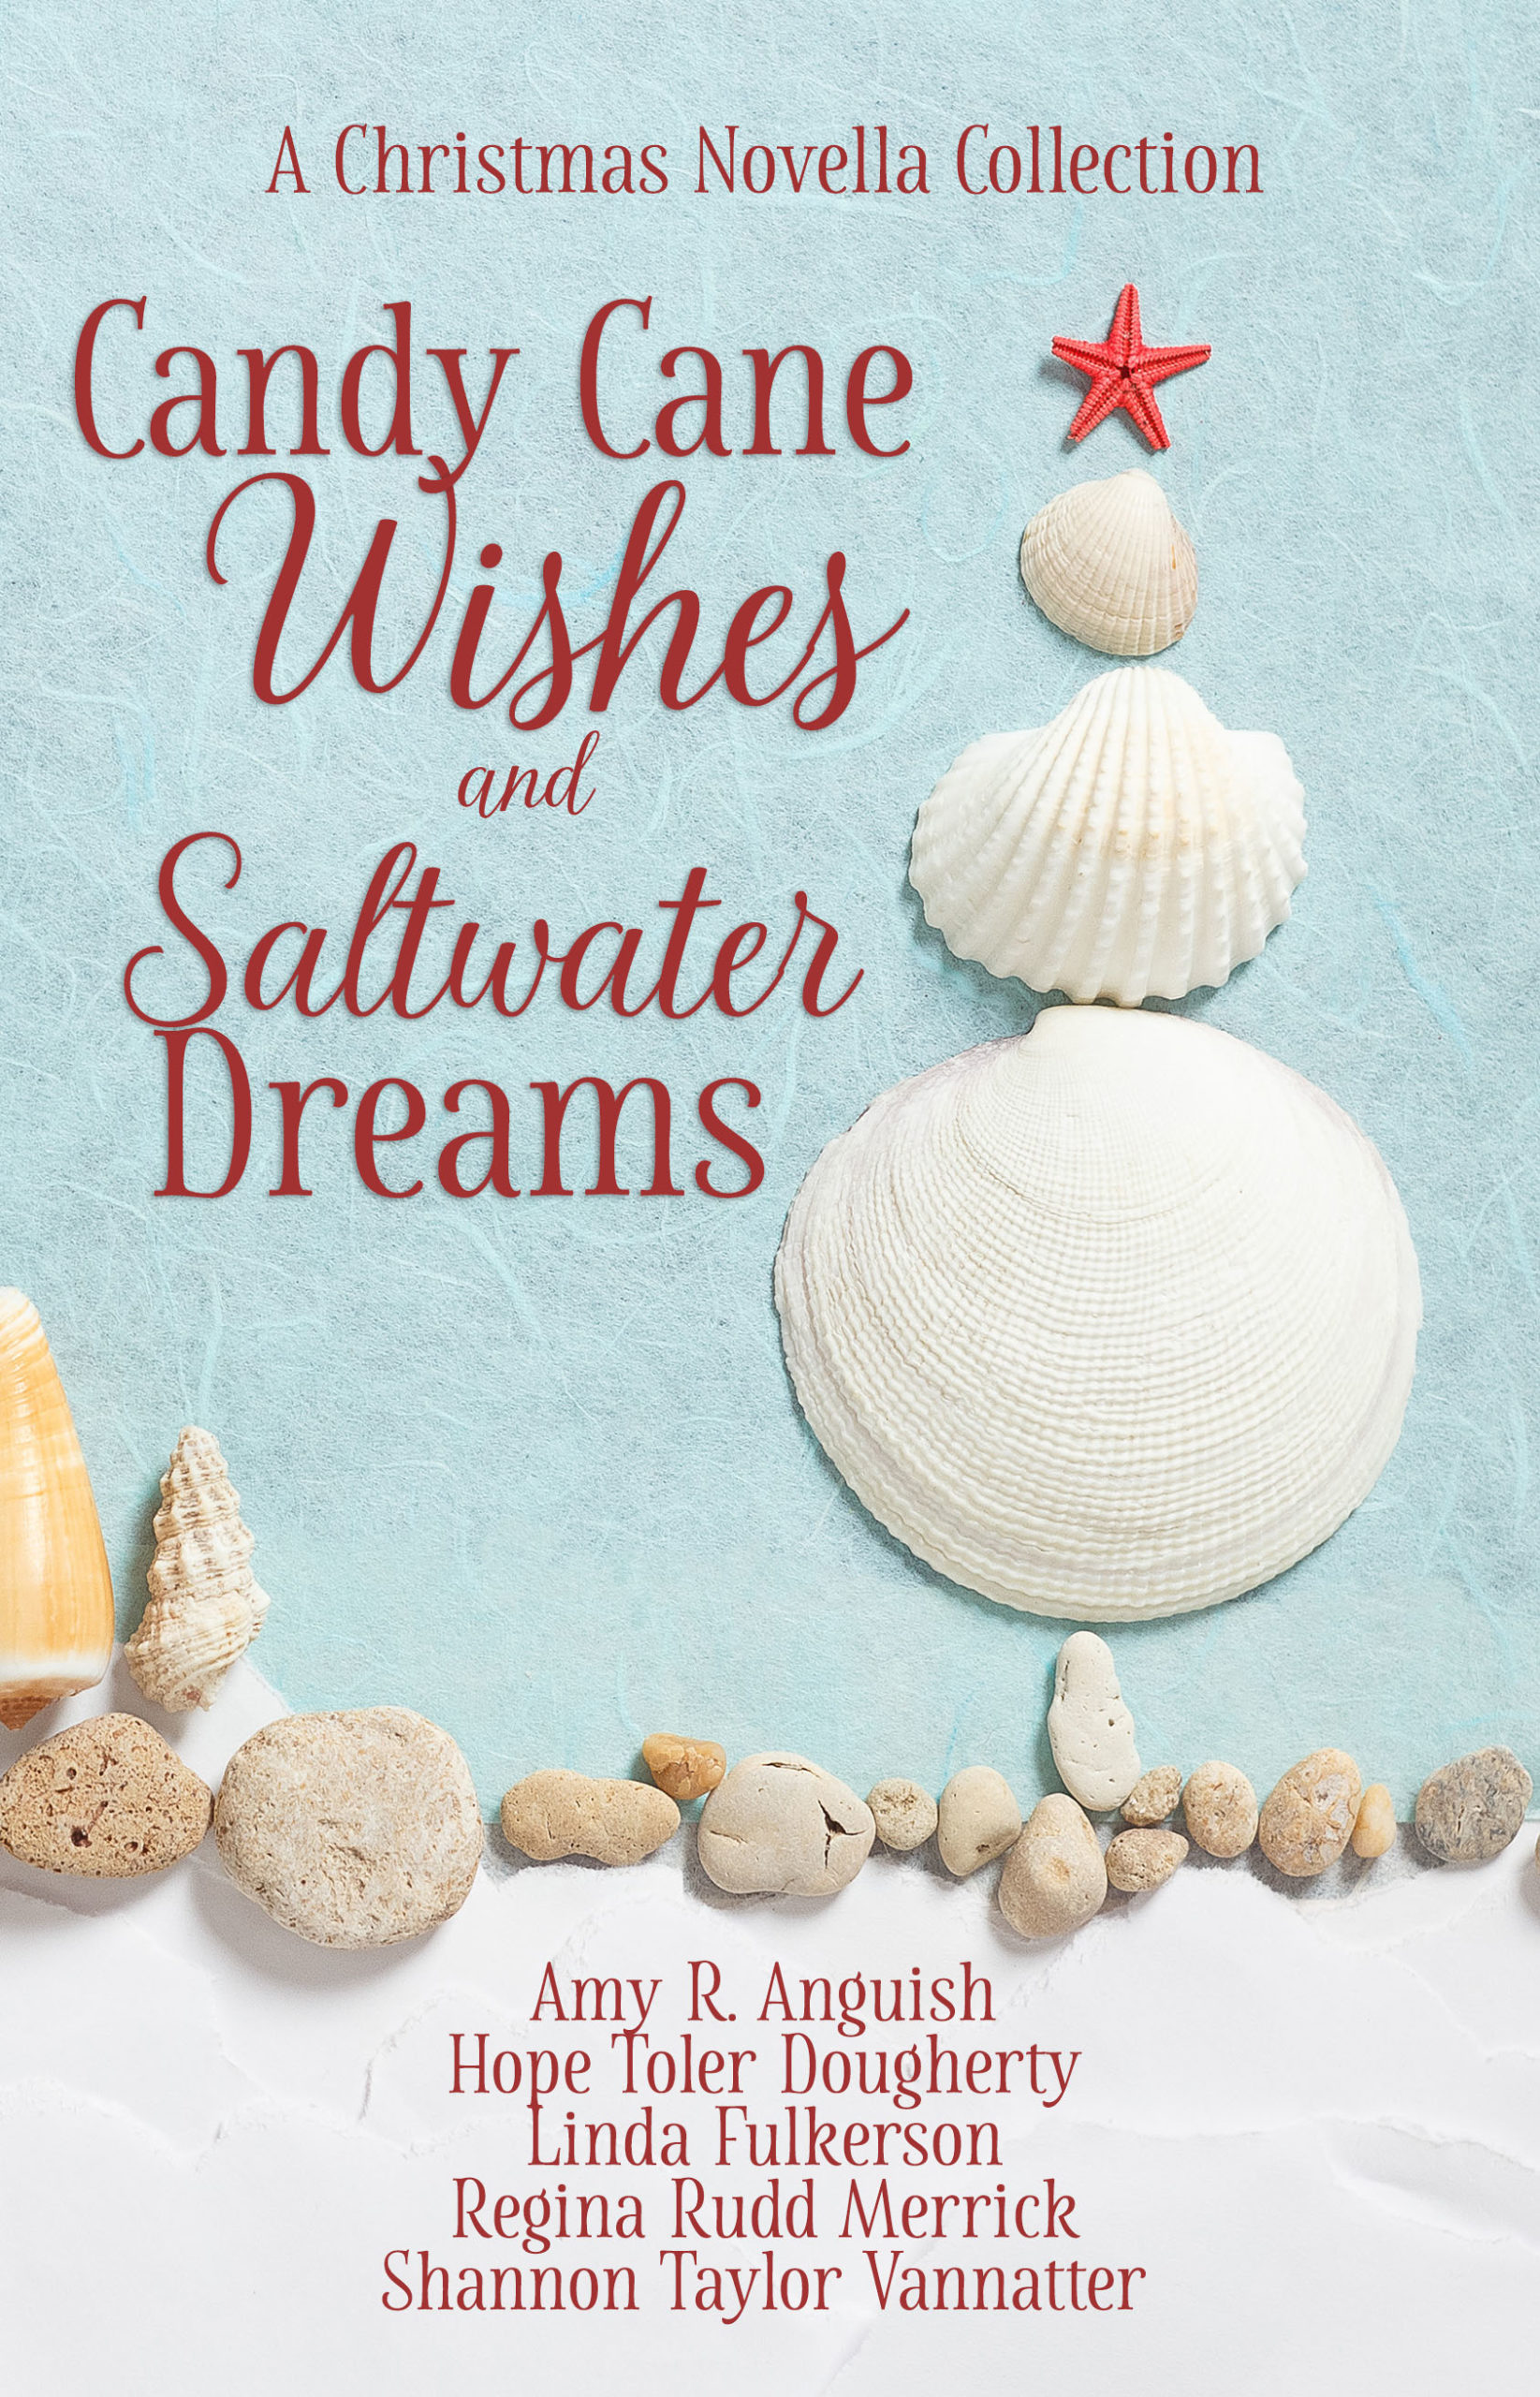 Image: Candy Cane Wishes and Saltwater Dreams